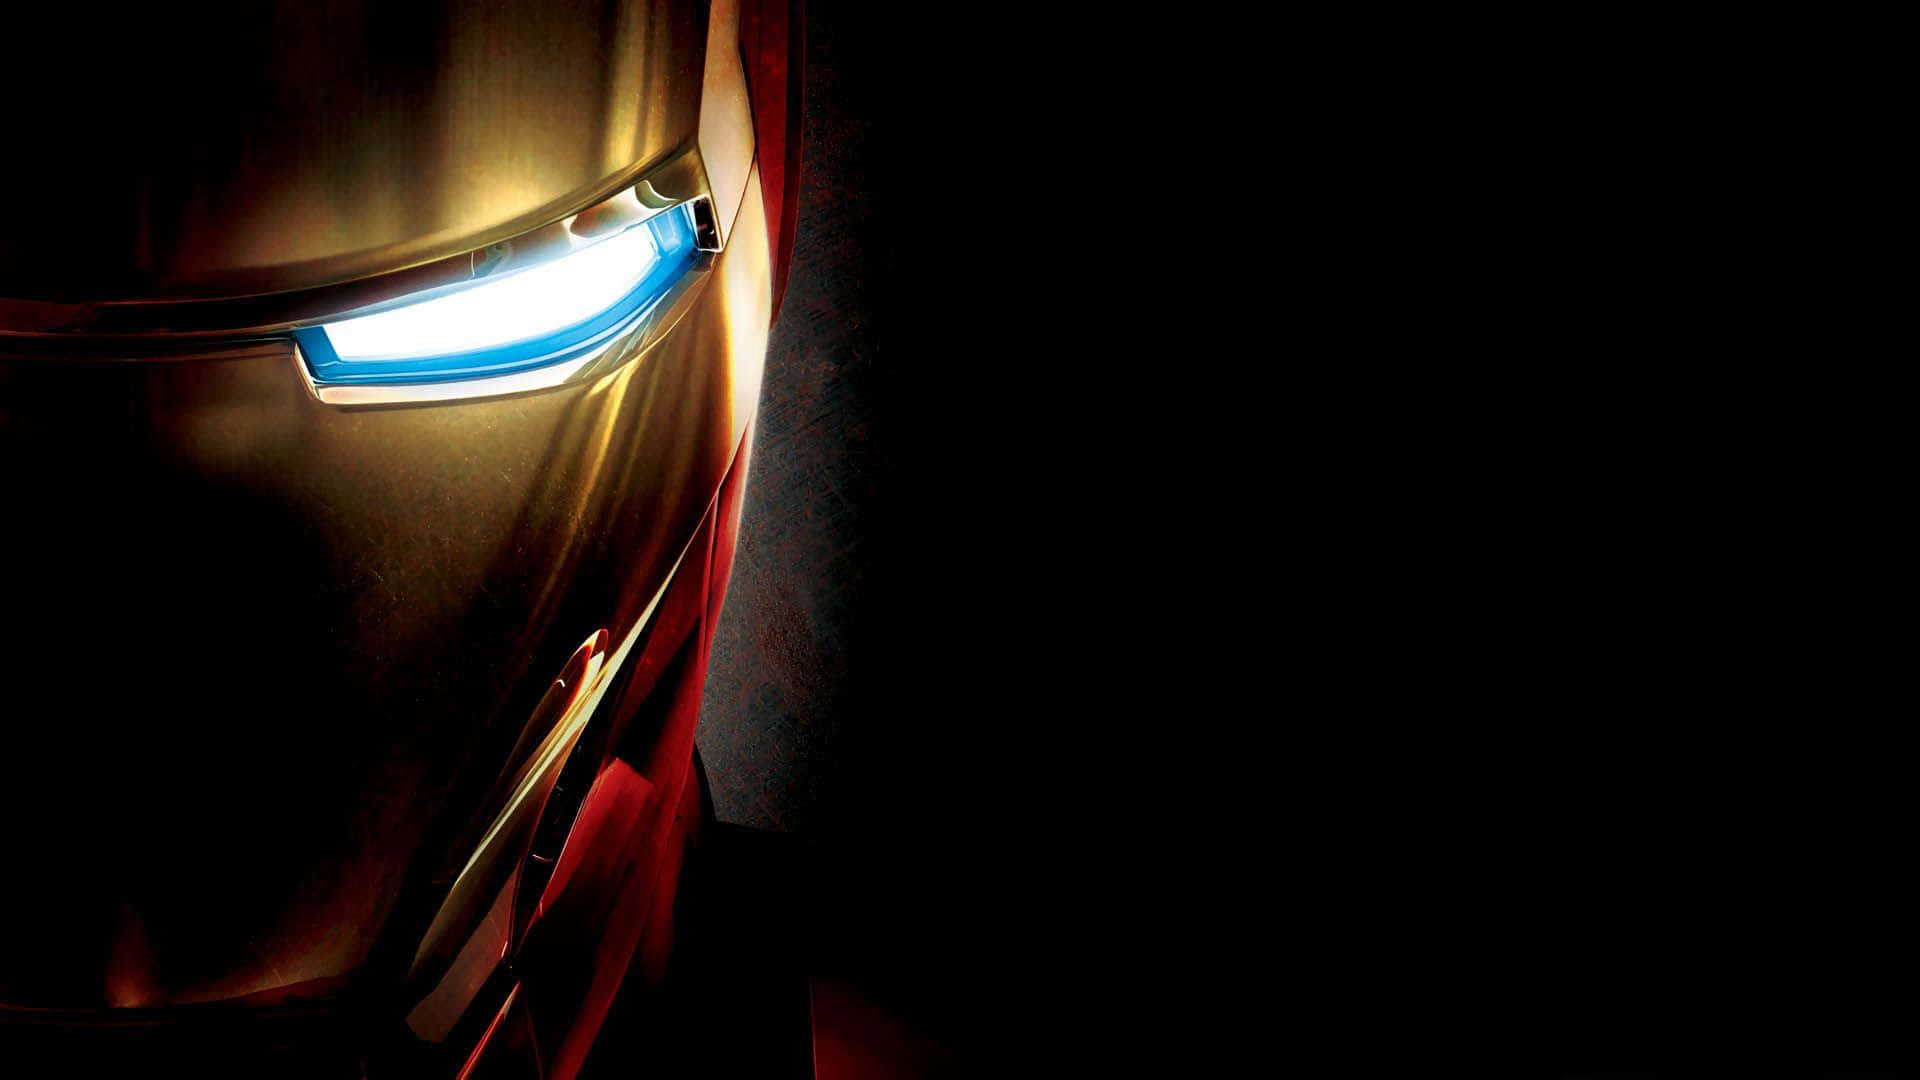 Iron Man 3: Iron Man Suited Up For Battle Wallpaper